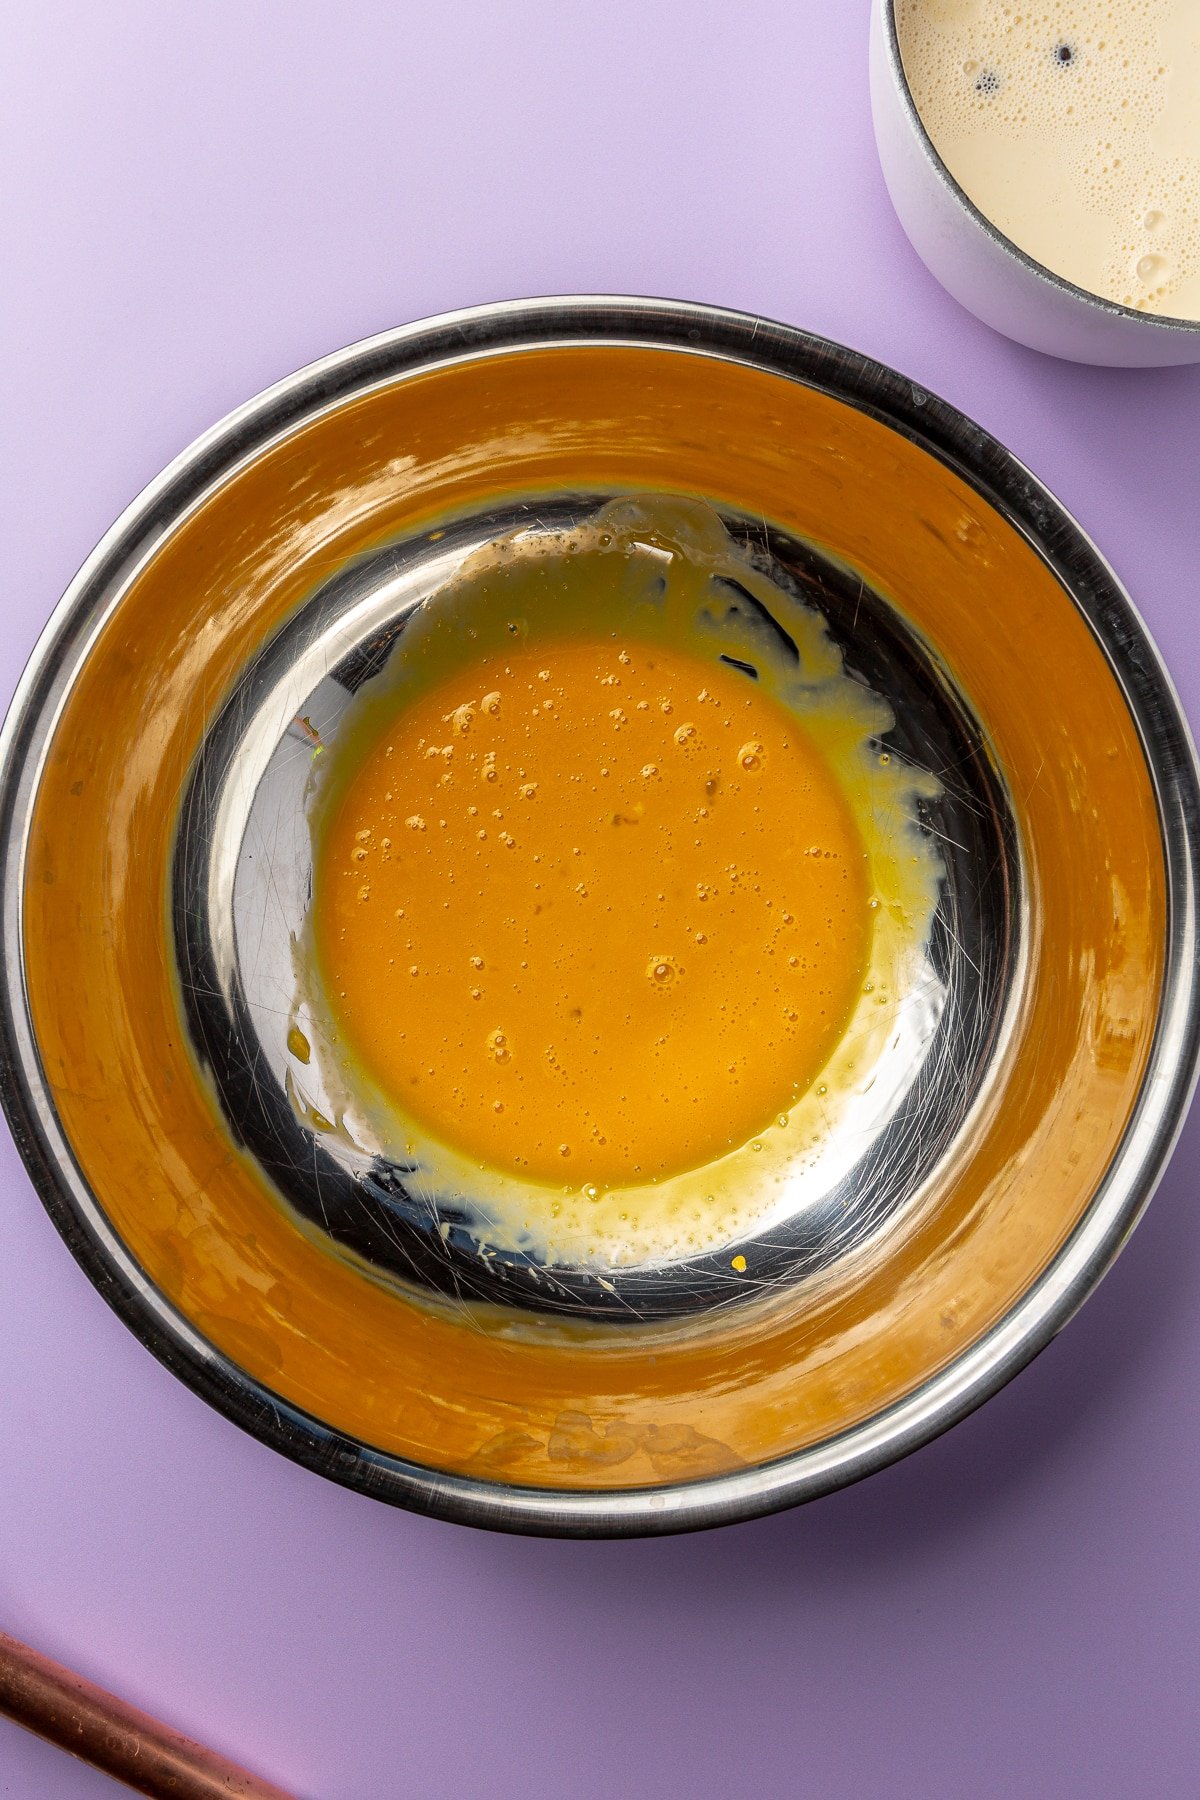 The egg yolks have been whisked together in the metal mixing bowl.